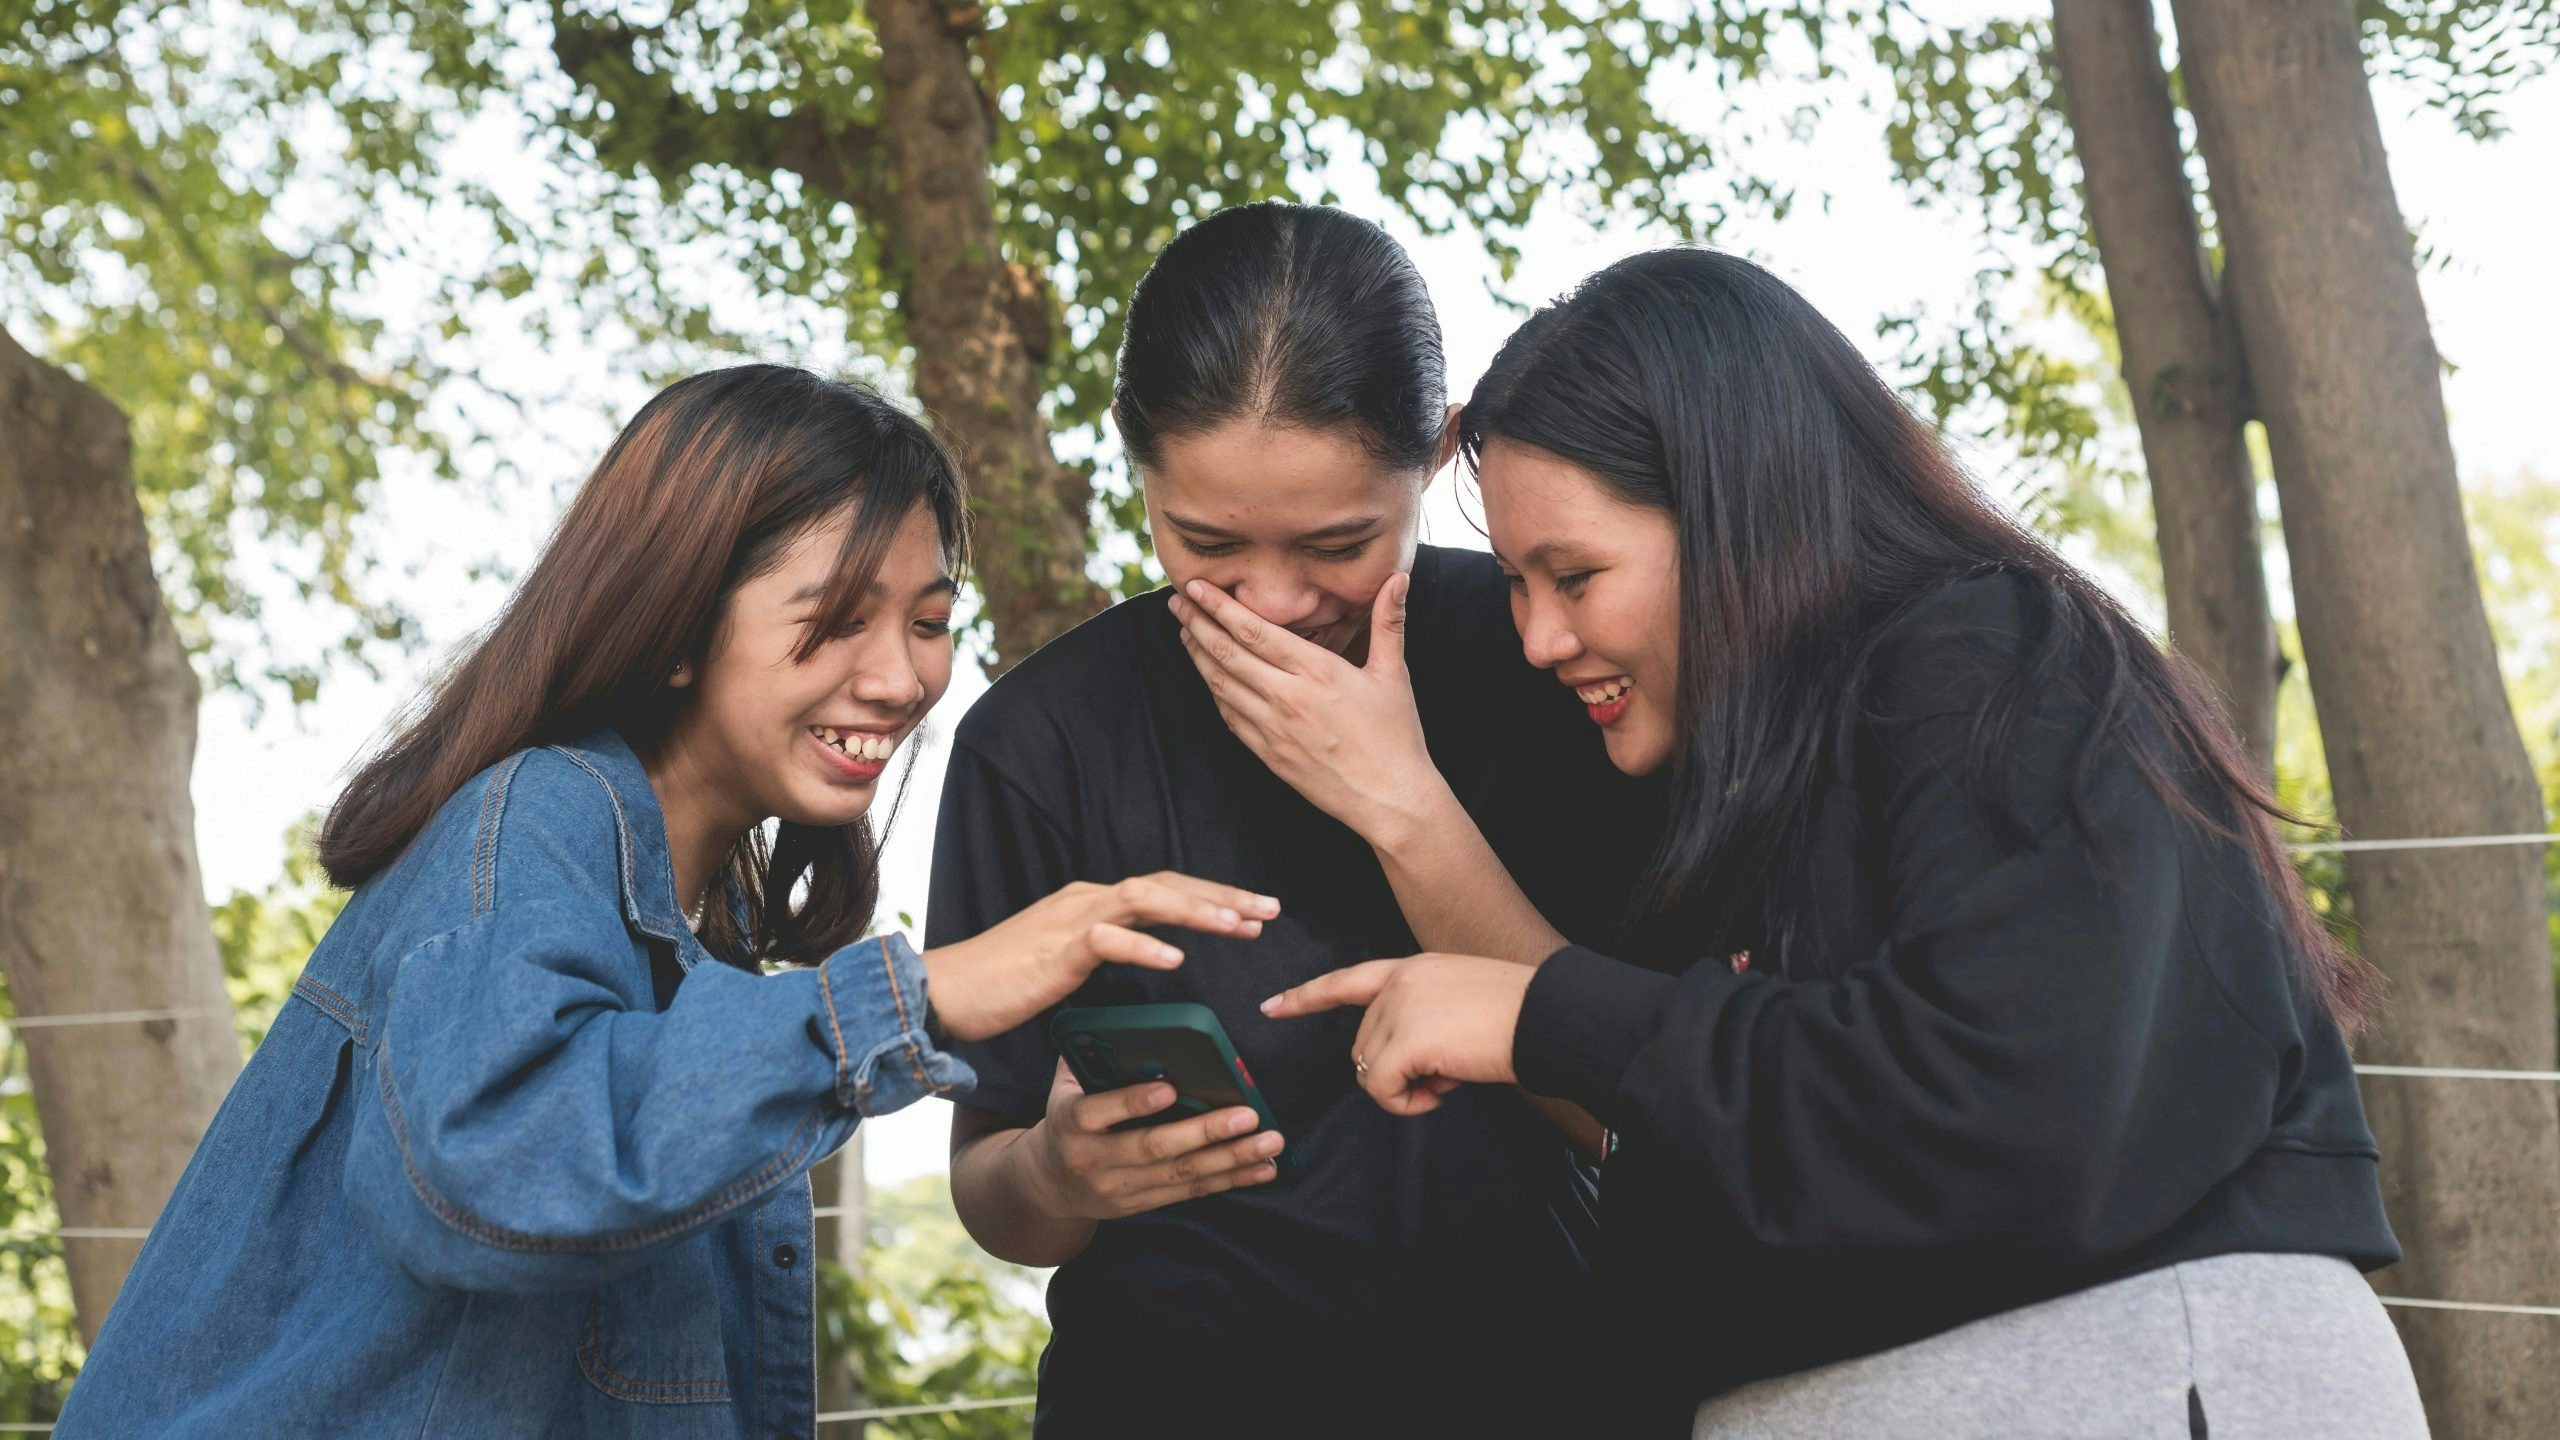 More companies are setting their sights on Southeast Asia. Here’s what they should know about the region’s growing cohort of digital consumers. Photo: Shutterstock